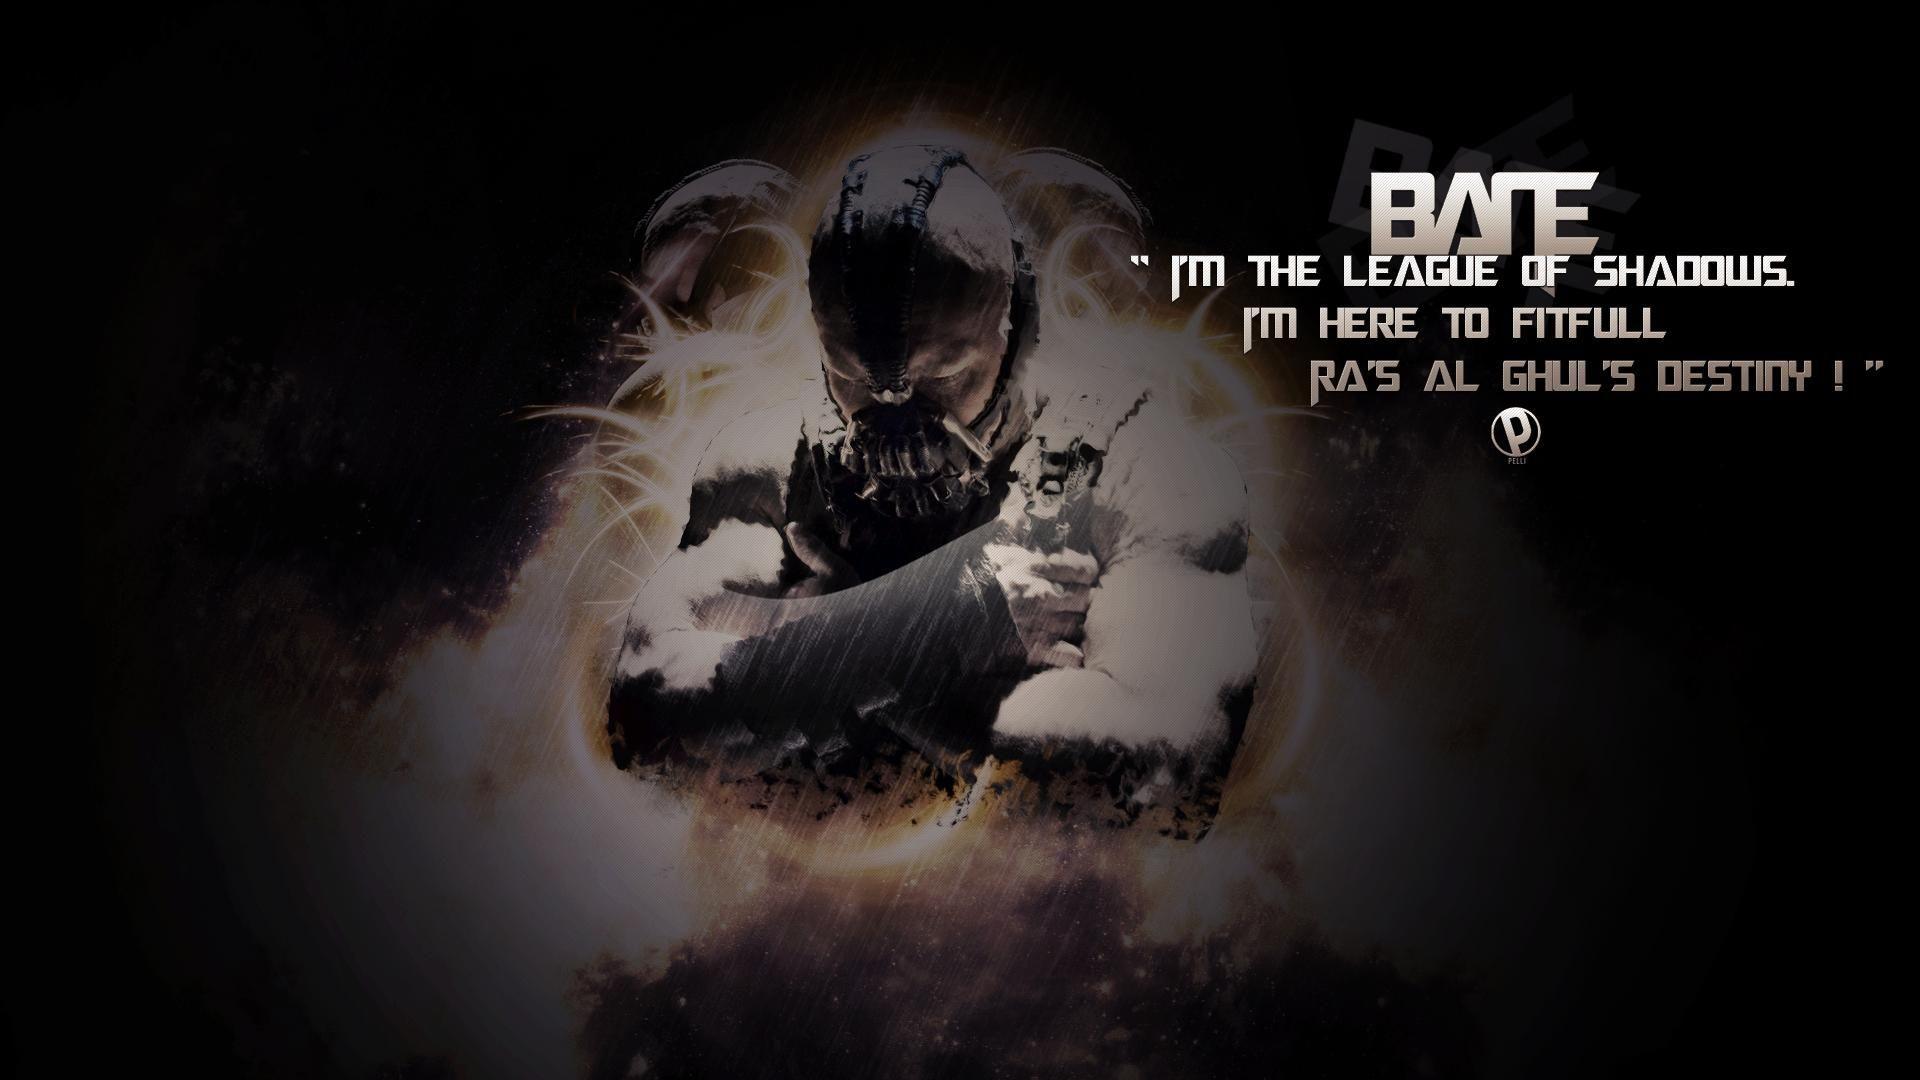 Nice HD Wallpaper Collection (48) of Bane. Awesome Image